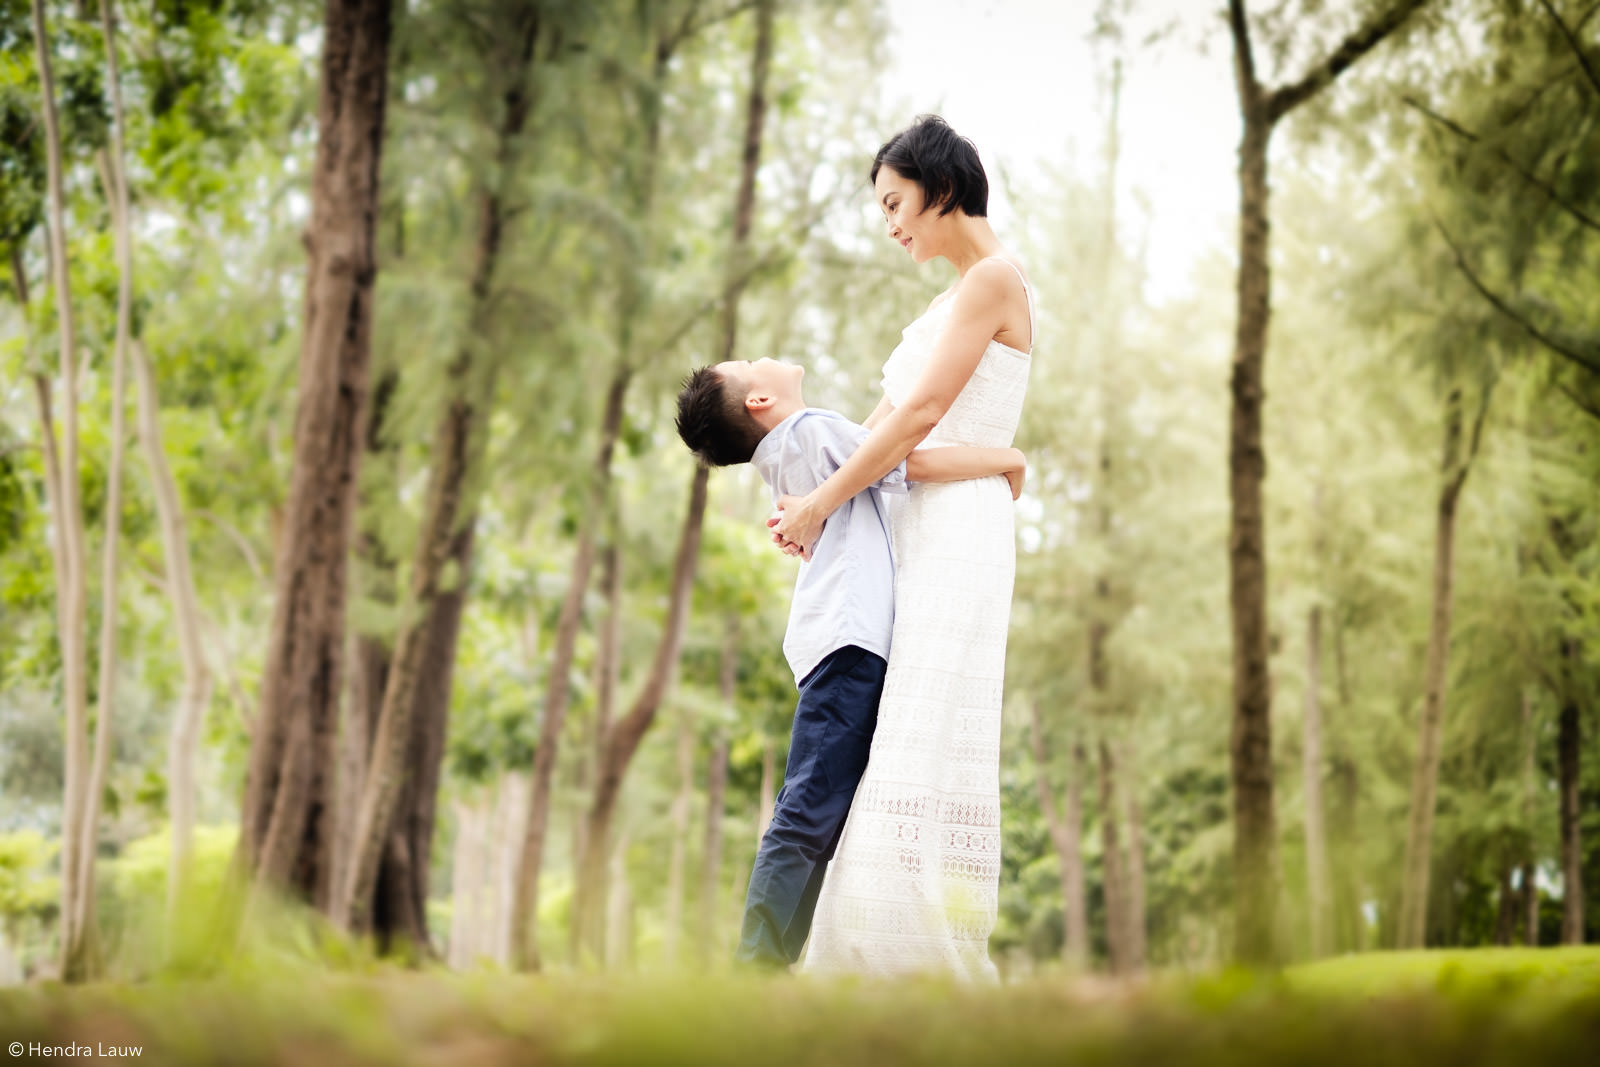 Outdoor family photoshoot in Singapore park